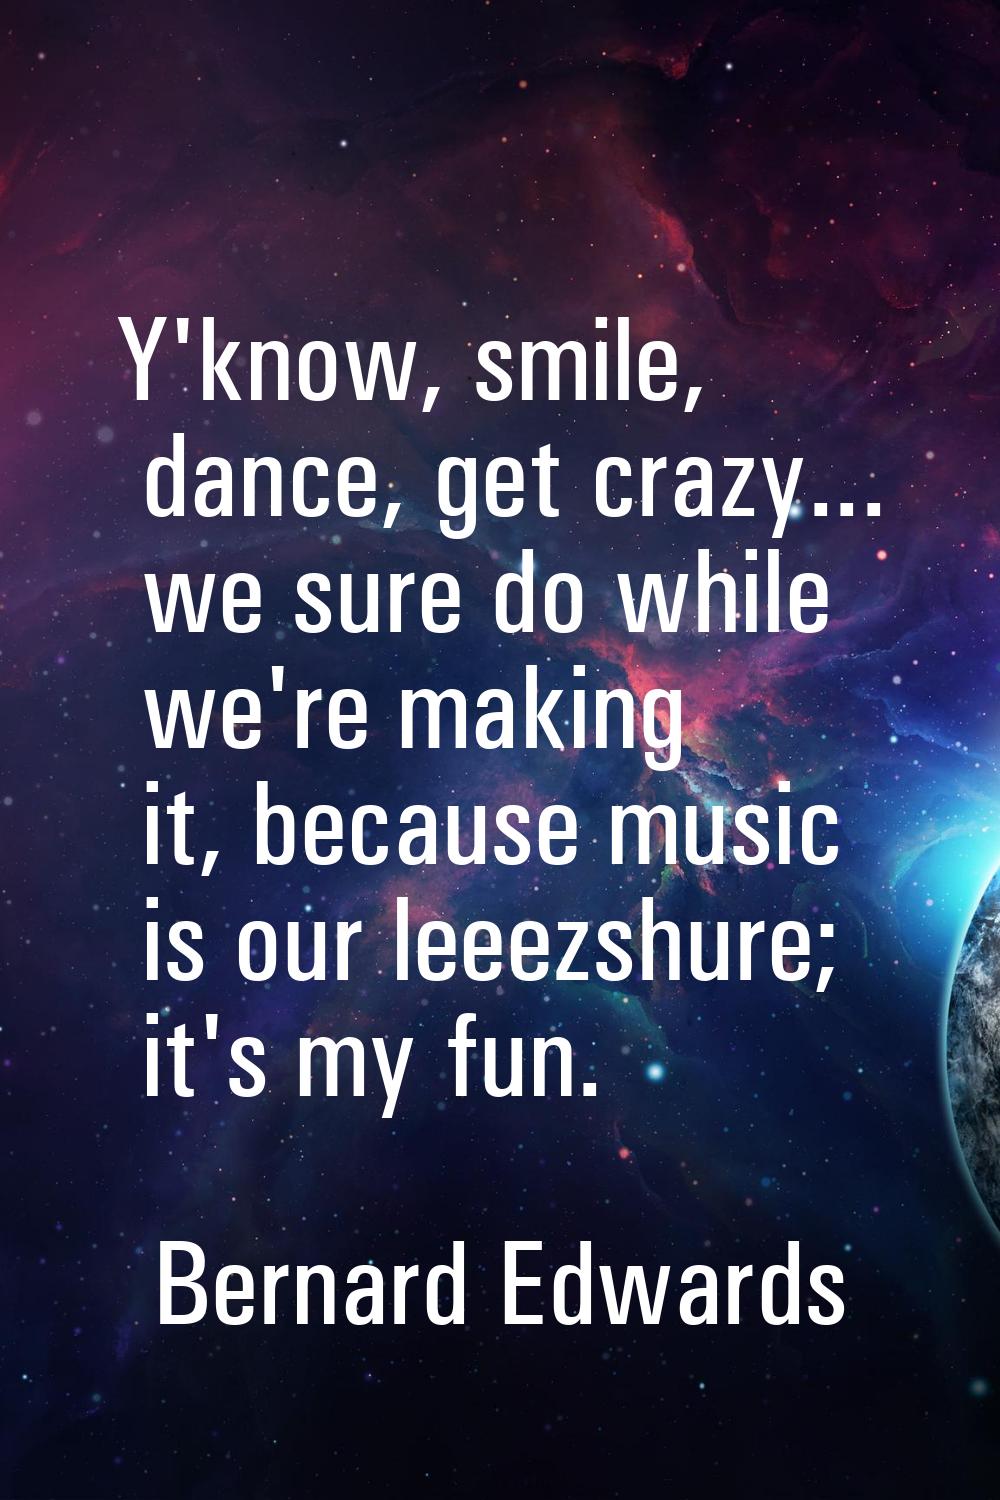 Y'know, smile, dance, get crazy... we sure do while we're making it, because music is our leeezshur